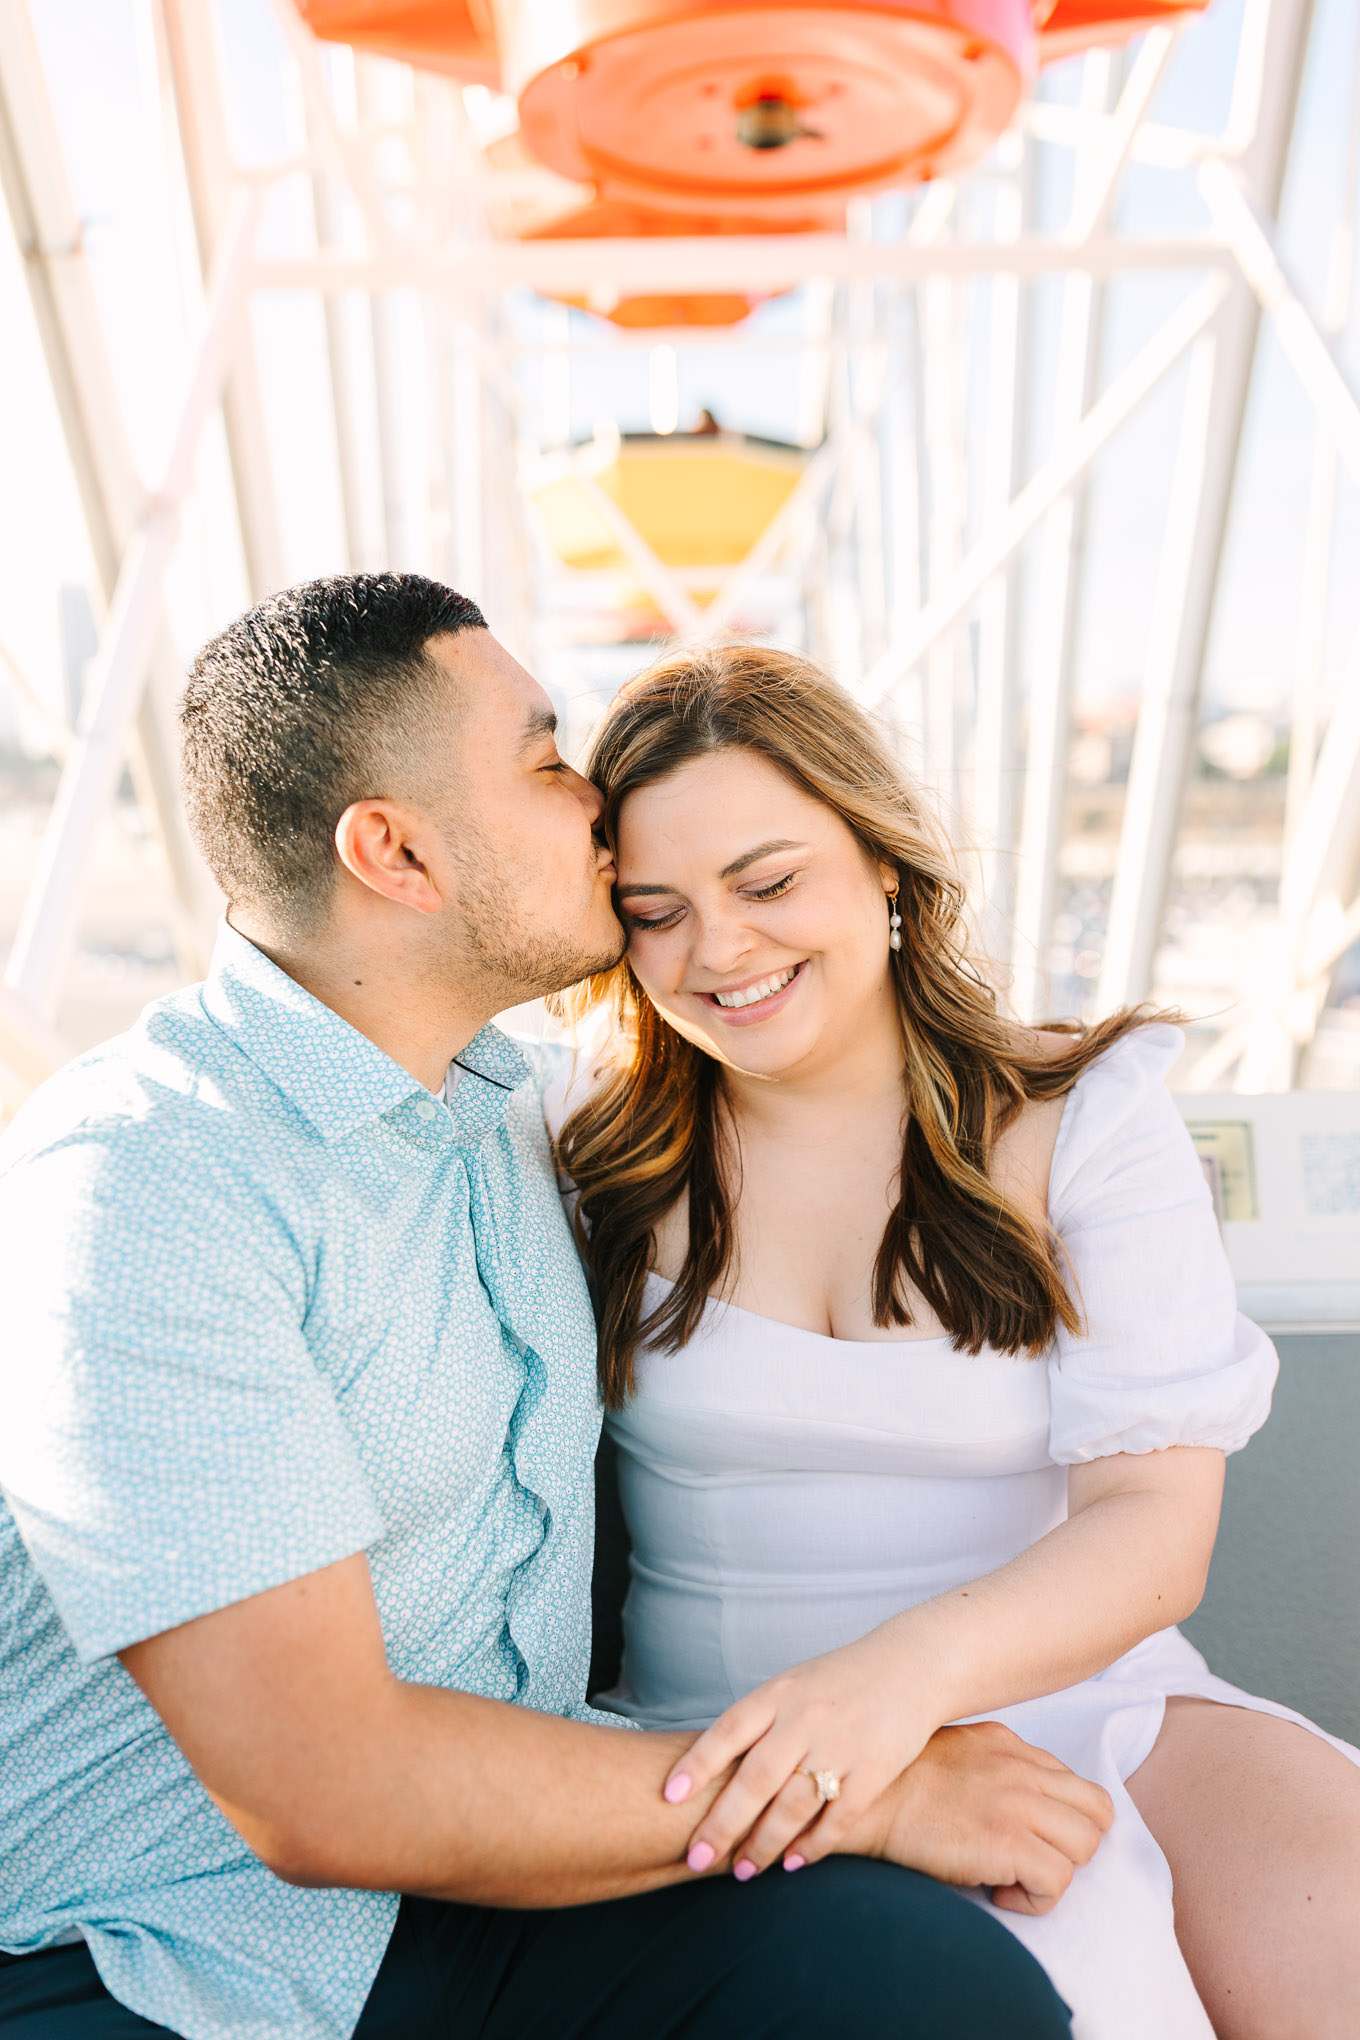 Santa Monica Pier engagement session | Wedding and elopement photography roundup | Los Angeles and Palm Springs  photographer | #losangeleswedding #palmspringswedding #elopementphotographer

Source: Mary Costa Photography | Los Angeles